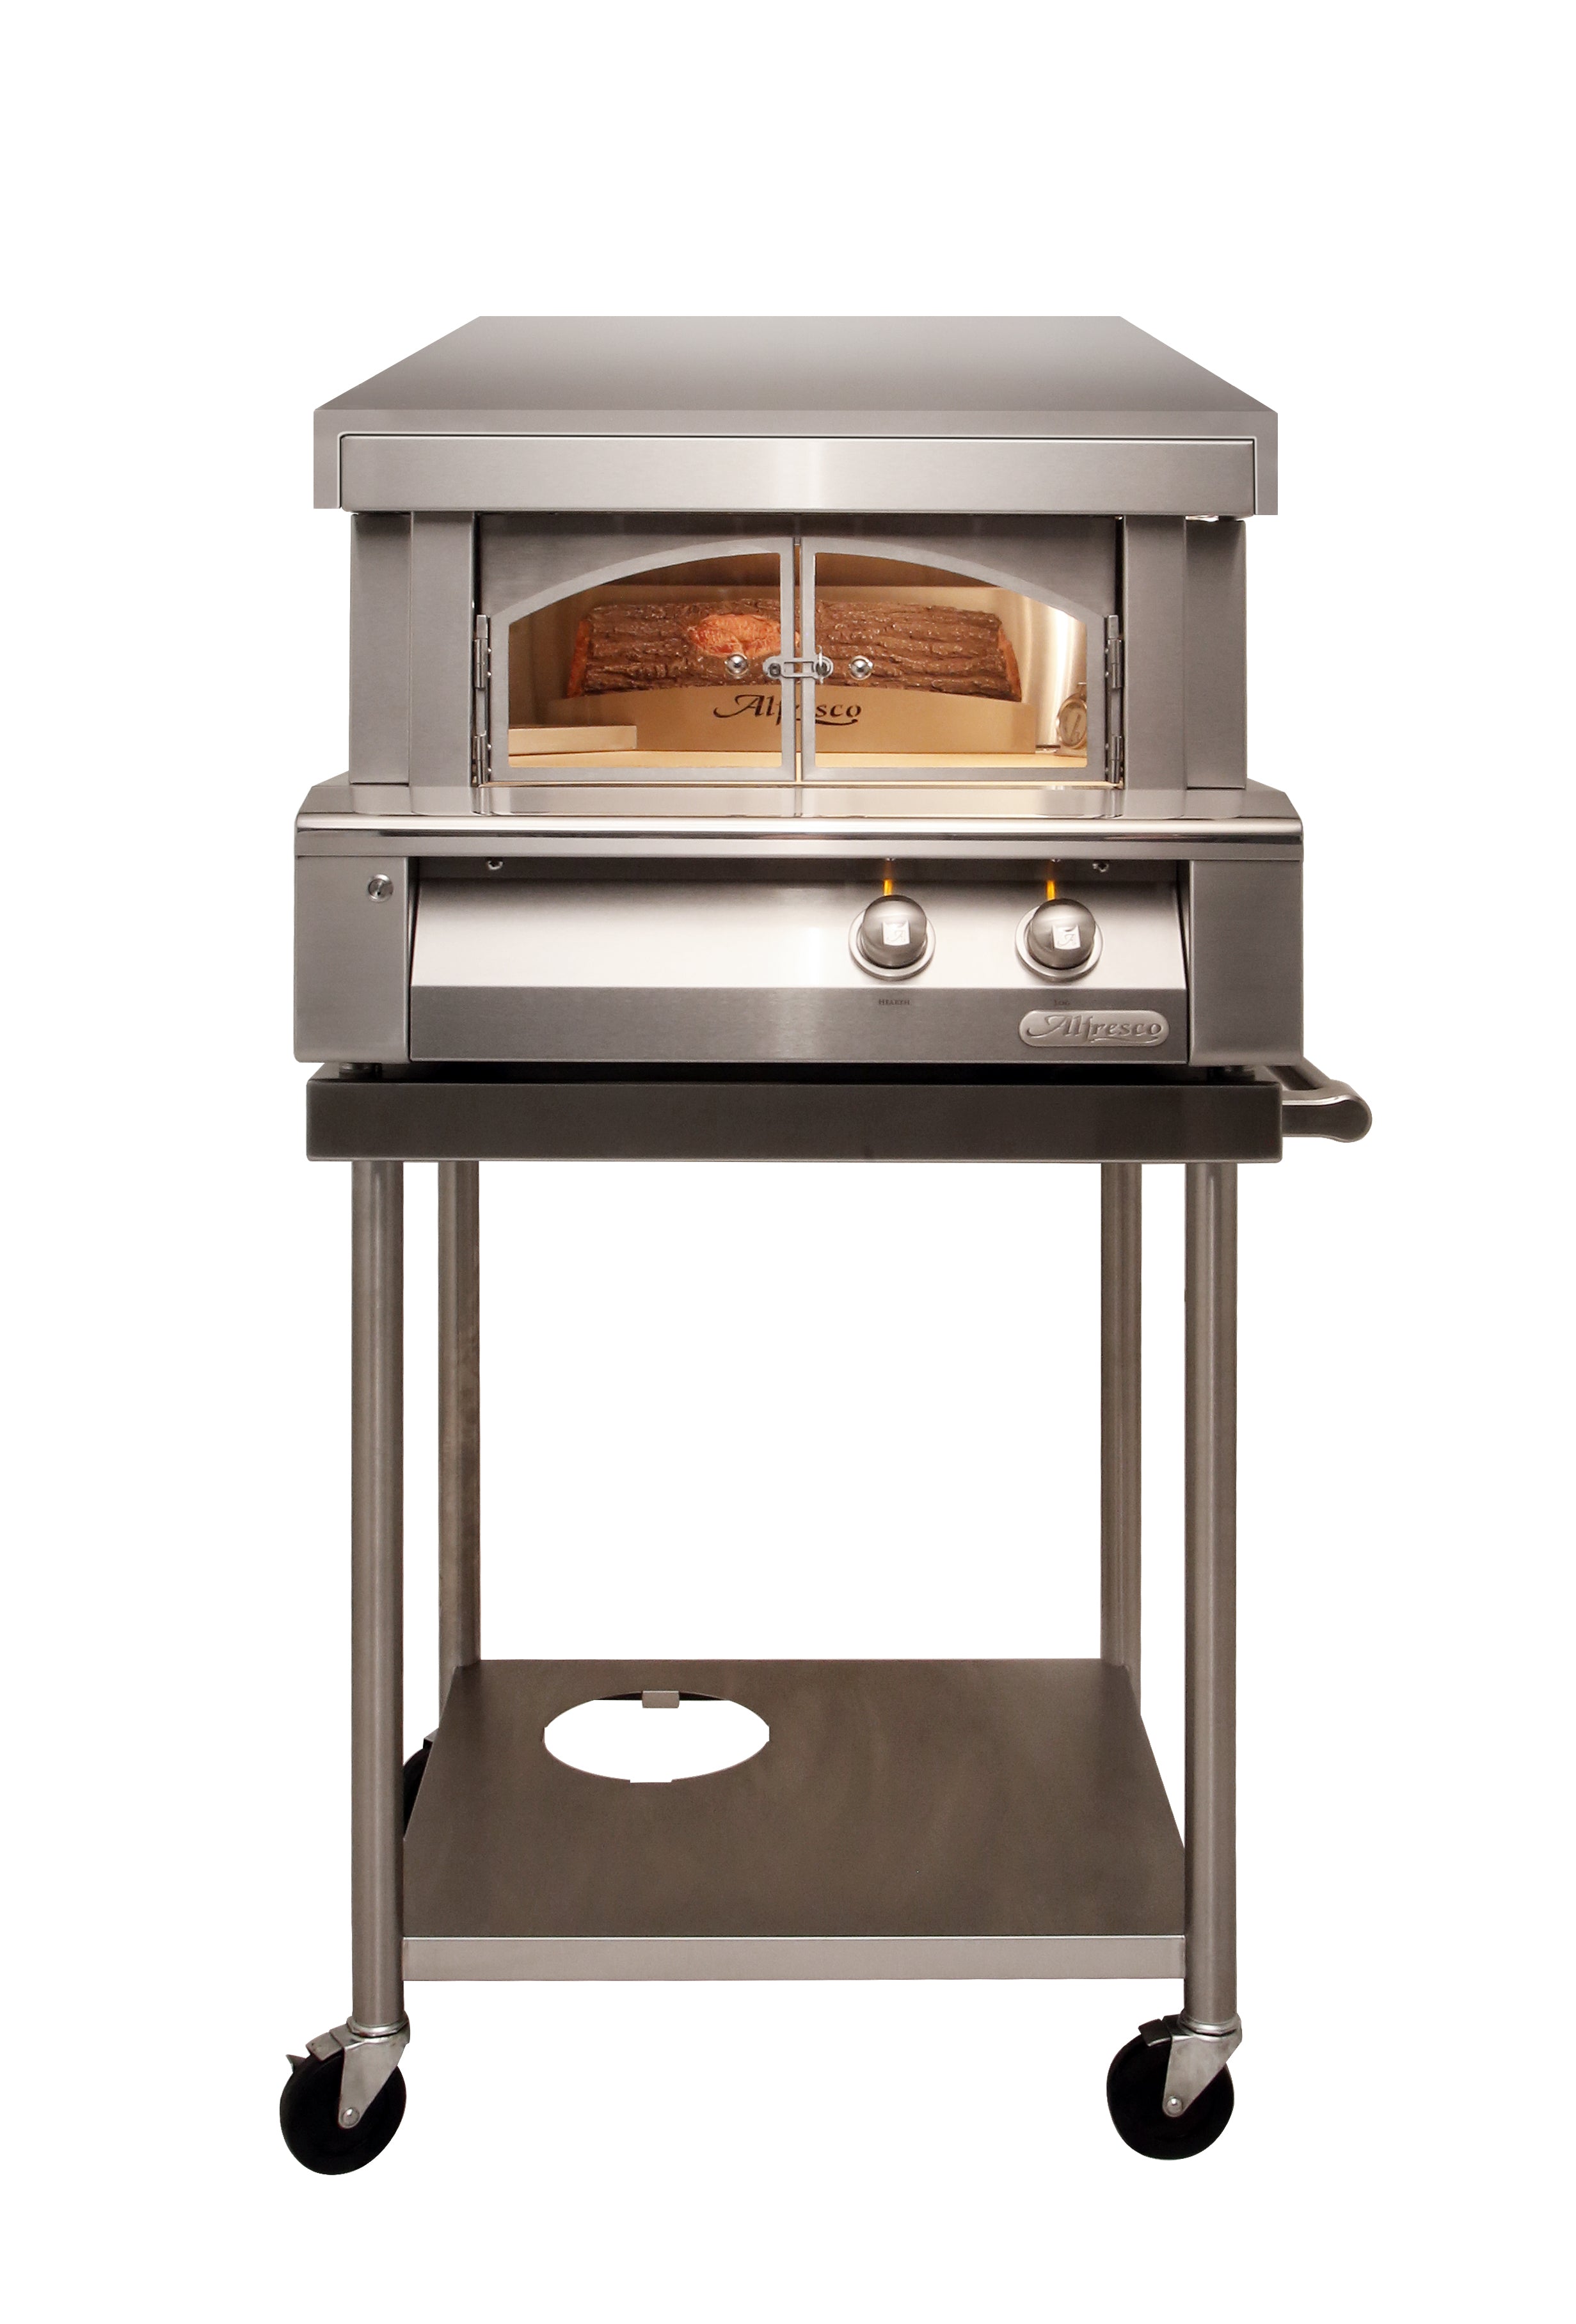 Alfresco - Pizza Oven Cart in Stainless - AXE-PZA-CART